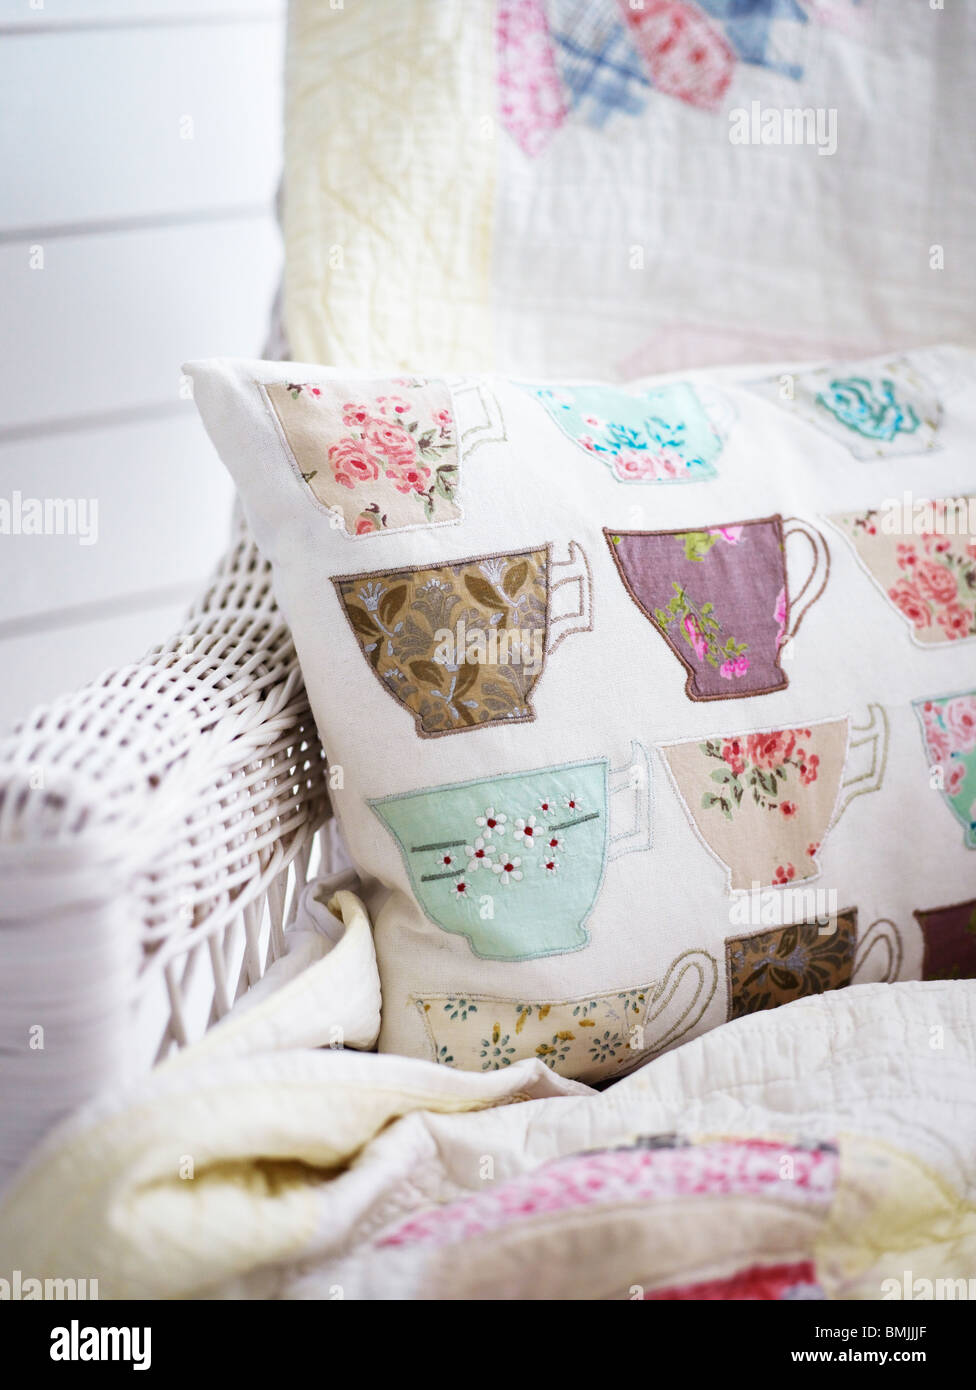 Scandinavia, Sweden, Stockholm, Pillow with cup print, close-up Stock Photo